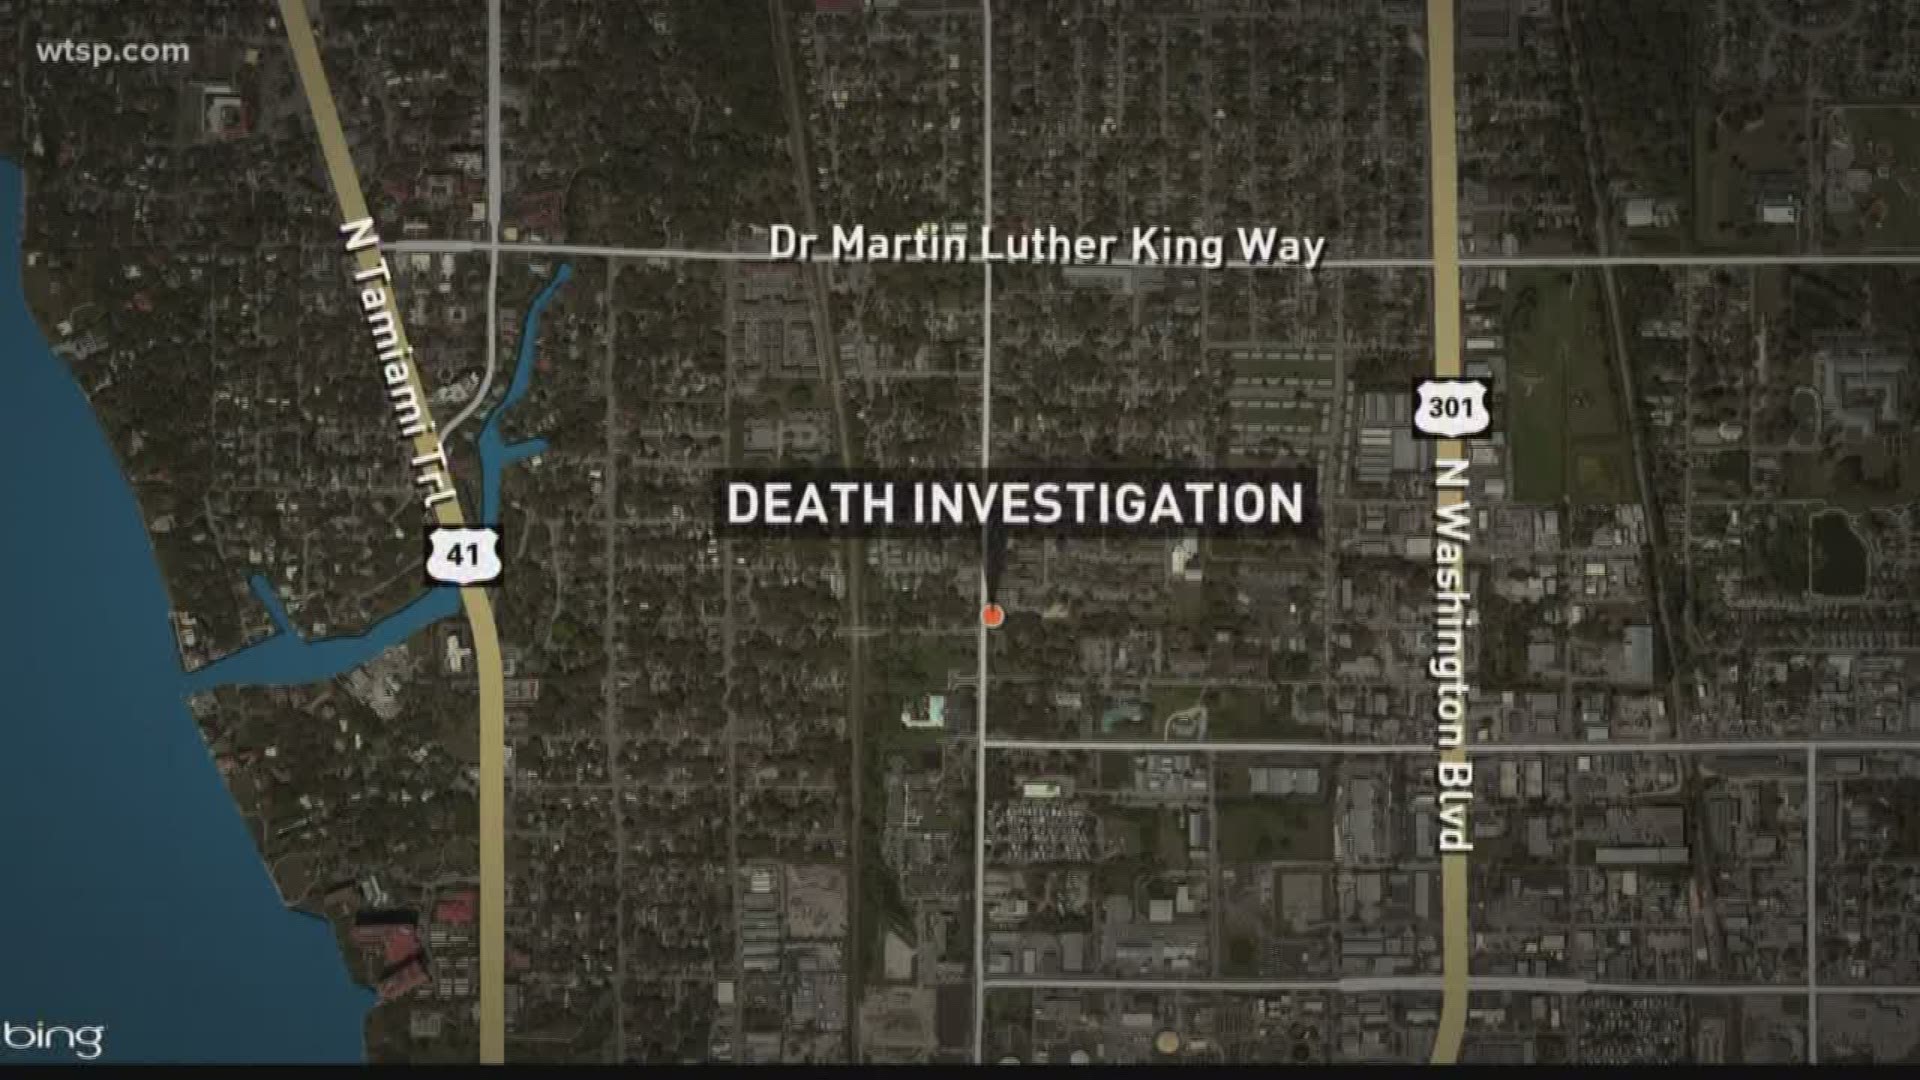 Several leads are being followed in the shooting death of a teenager, Sarasota police say.